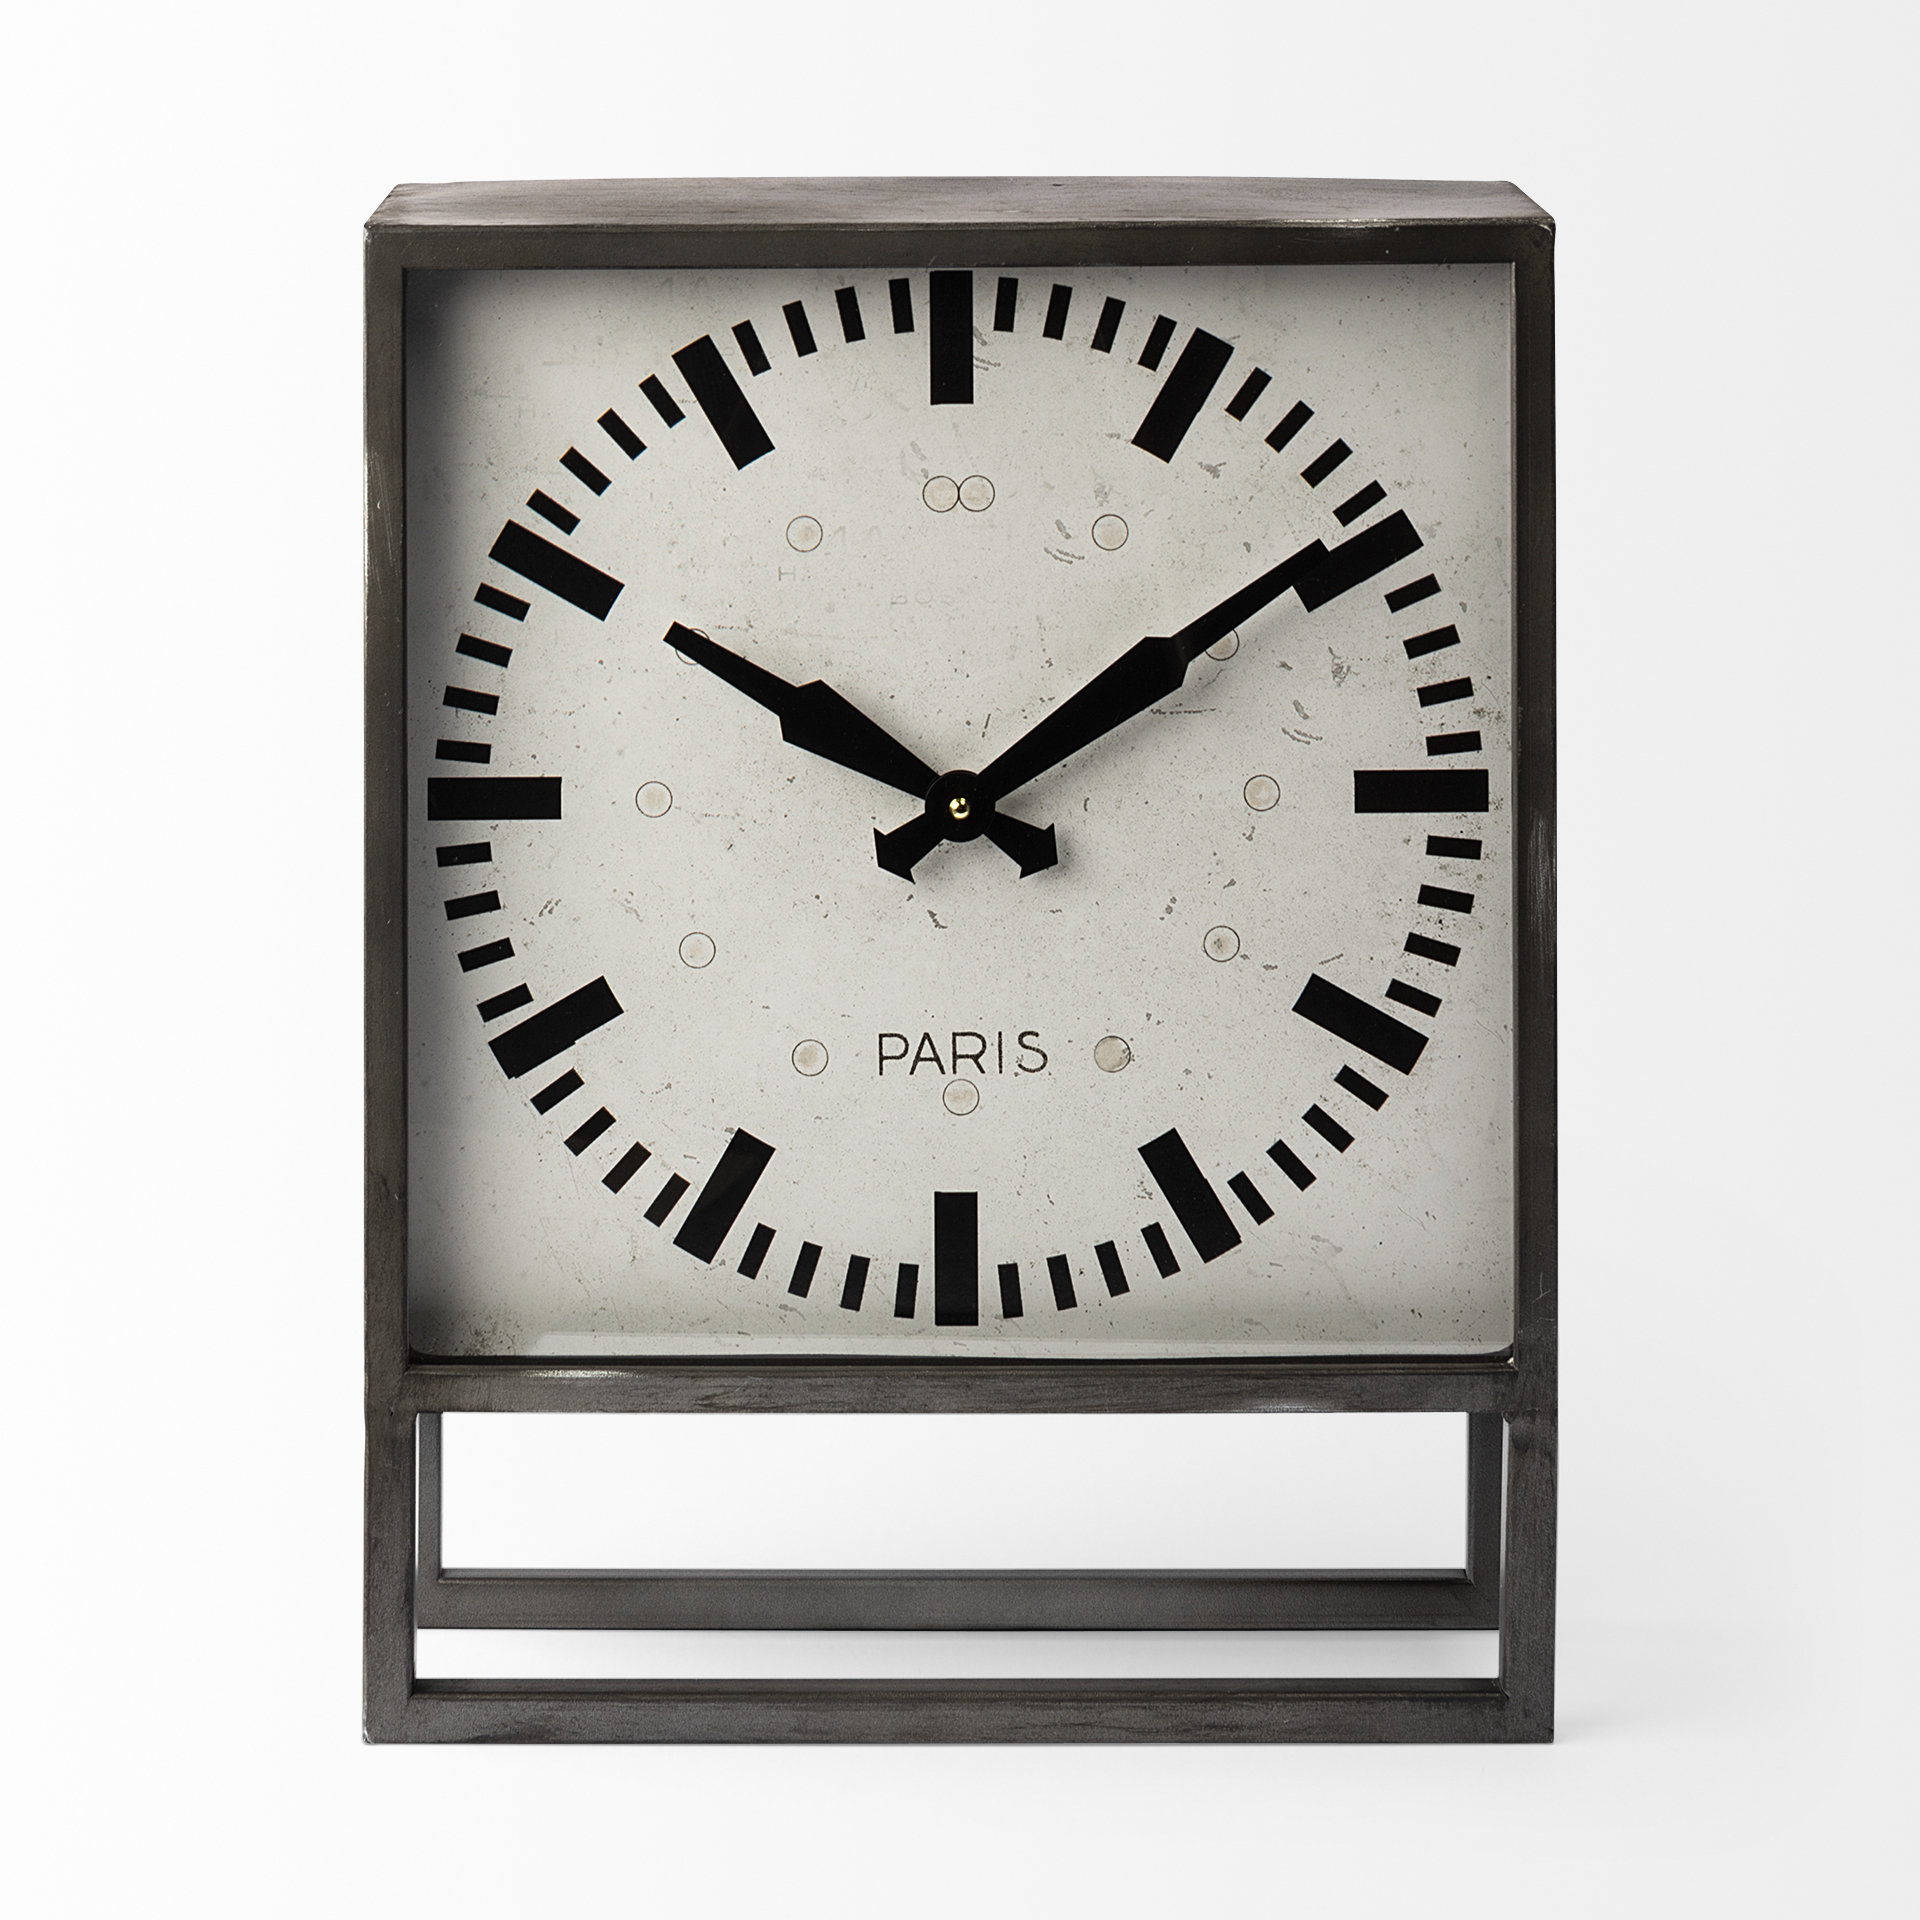 Square Gray Metal Desk / Table Clock w/ Simple White and Black face